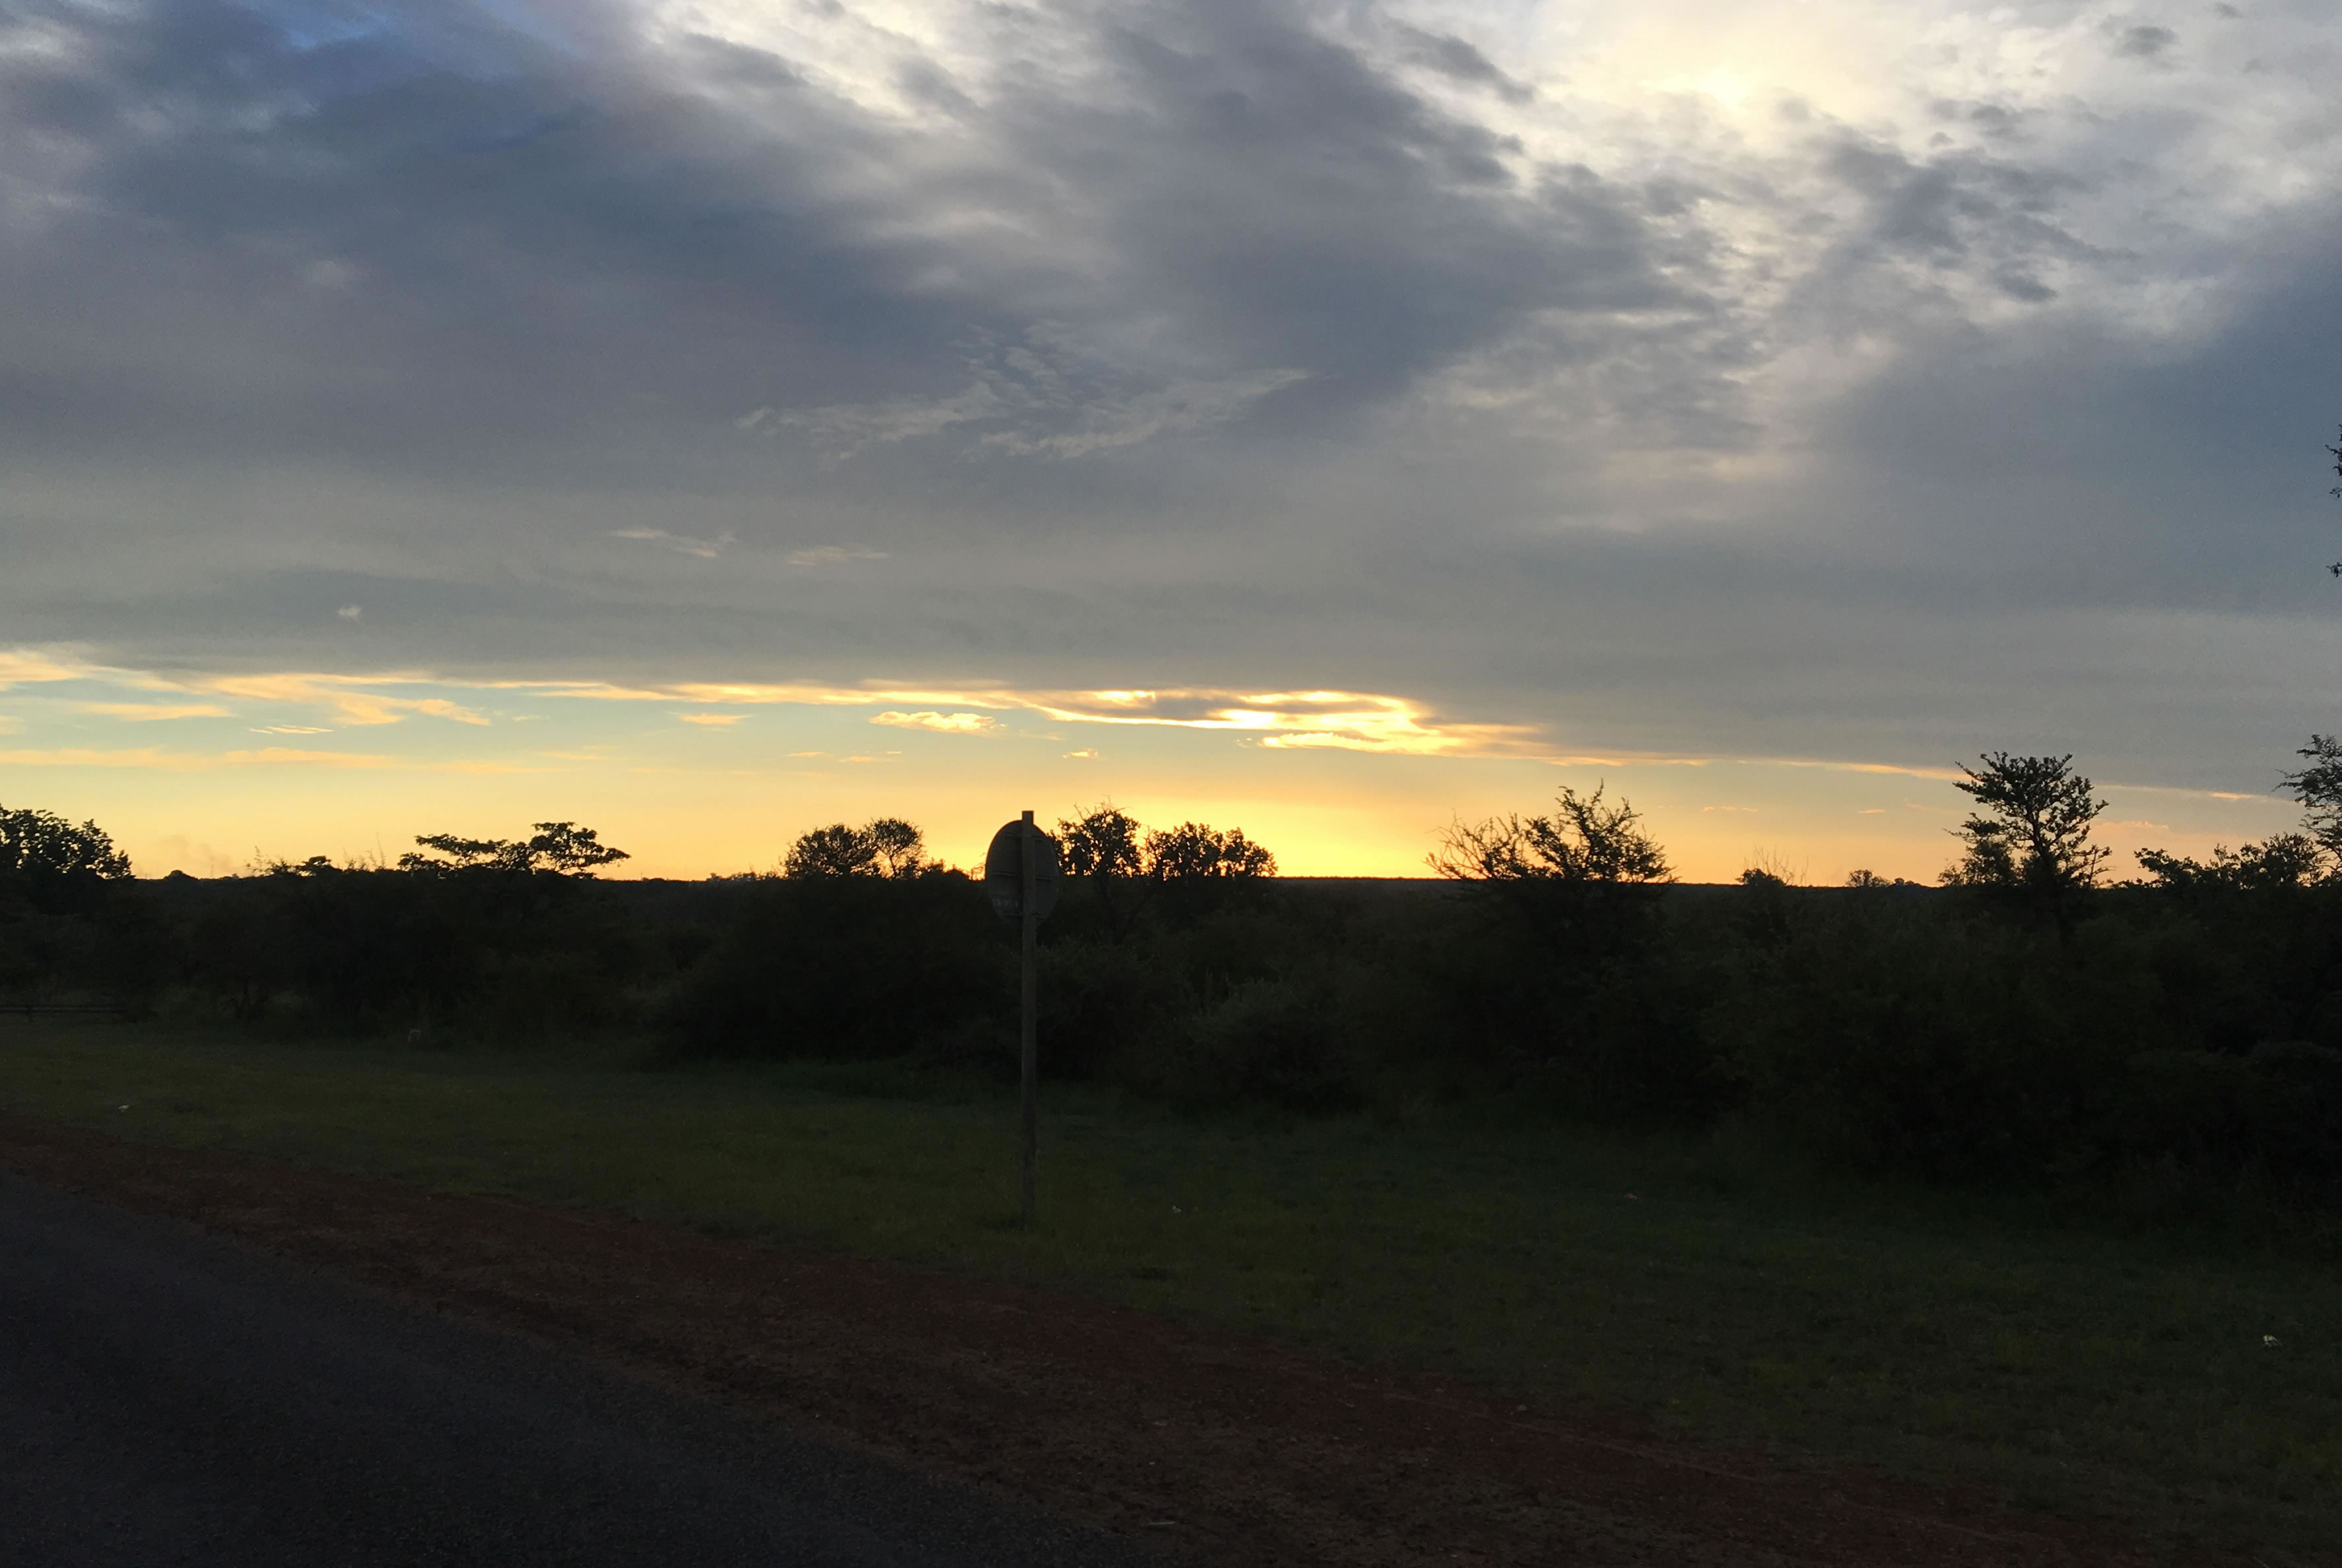 Sunset during game drive 